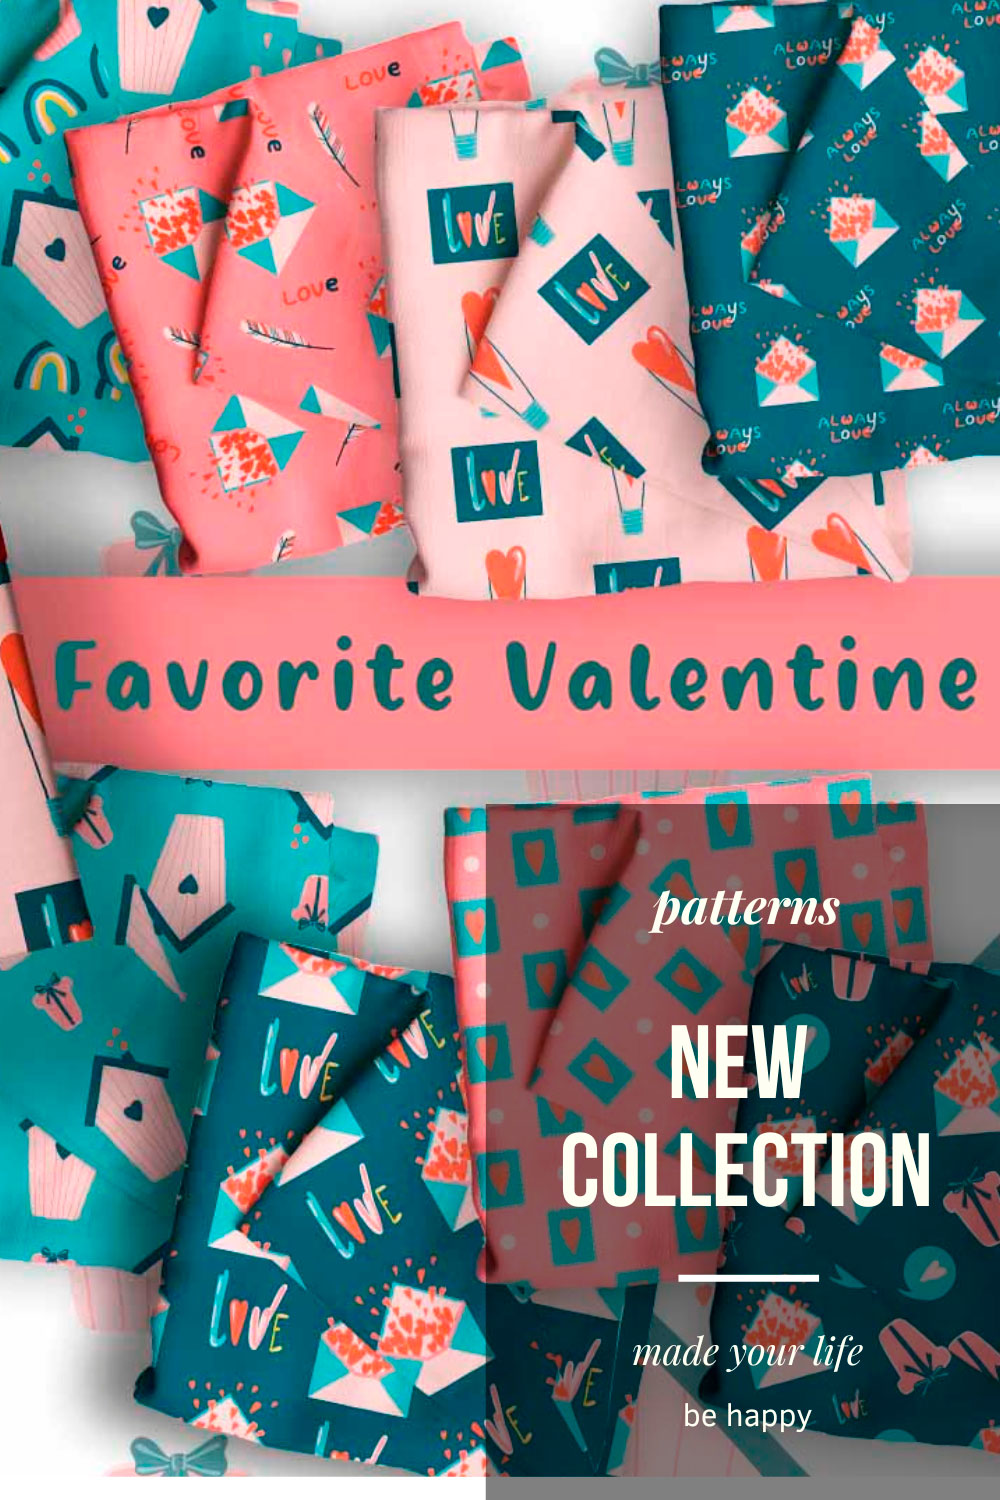 Collection of exquisite images of patterns on the theme of valentines day.